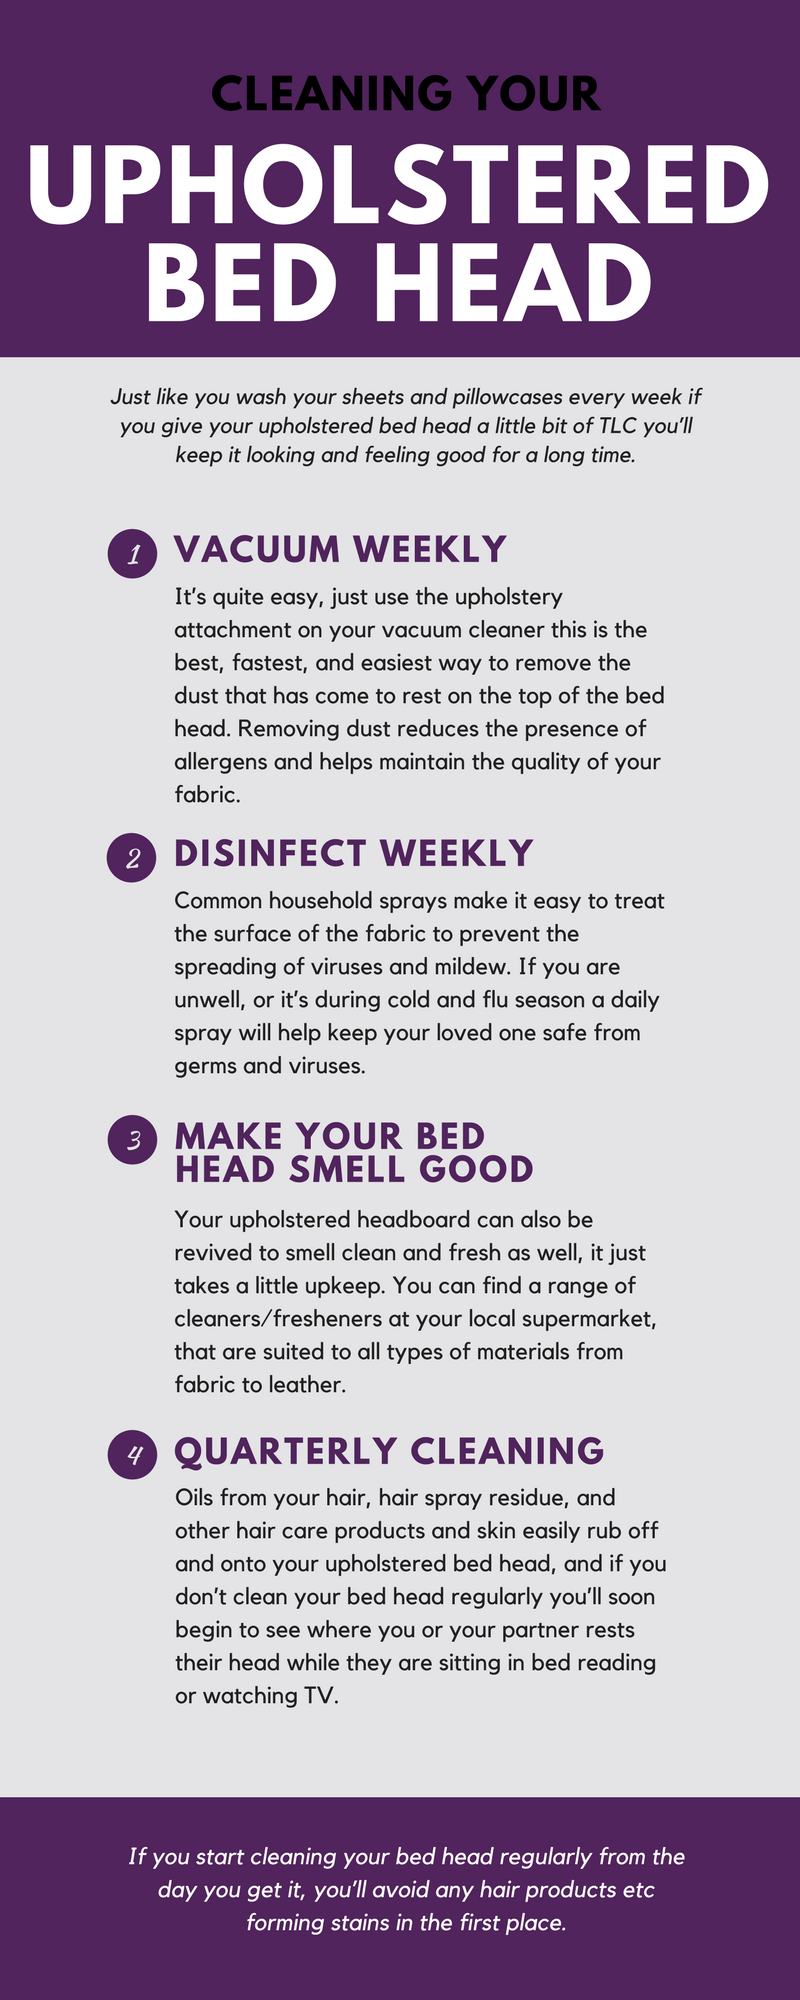 Cleaning your upholstered bed head